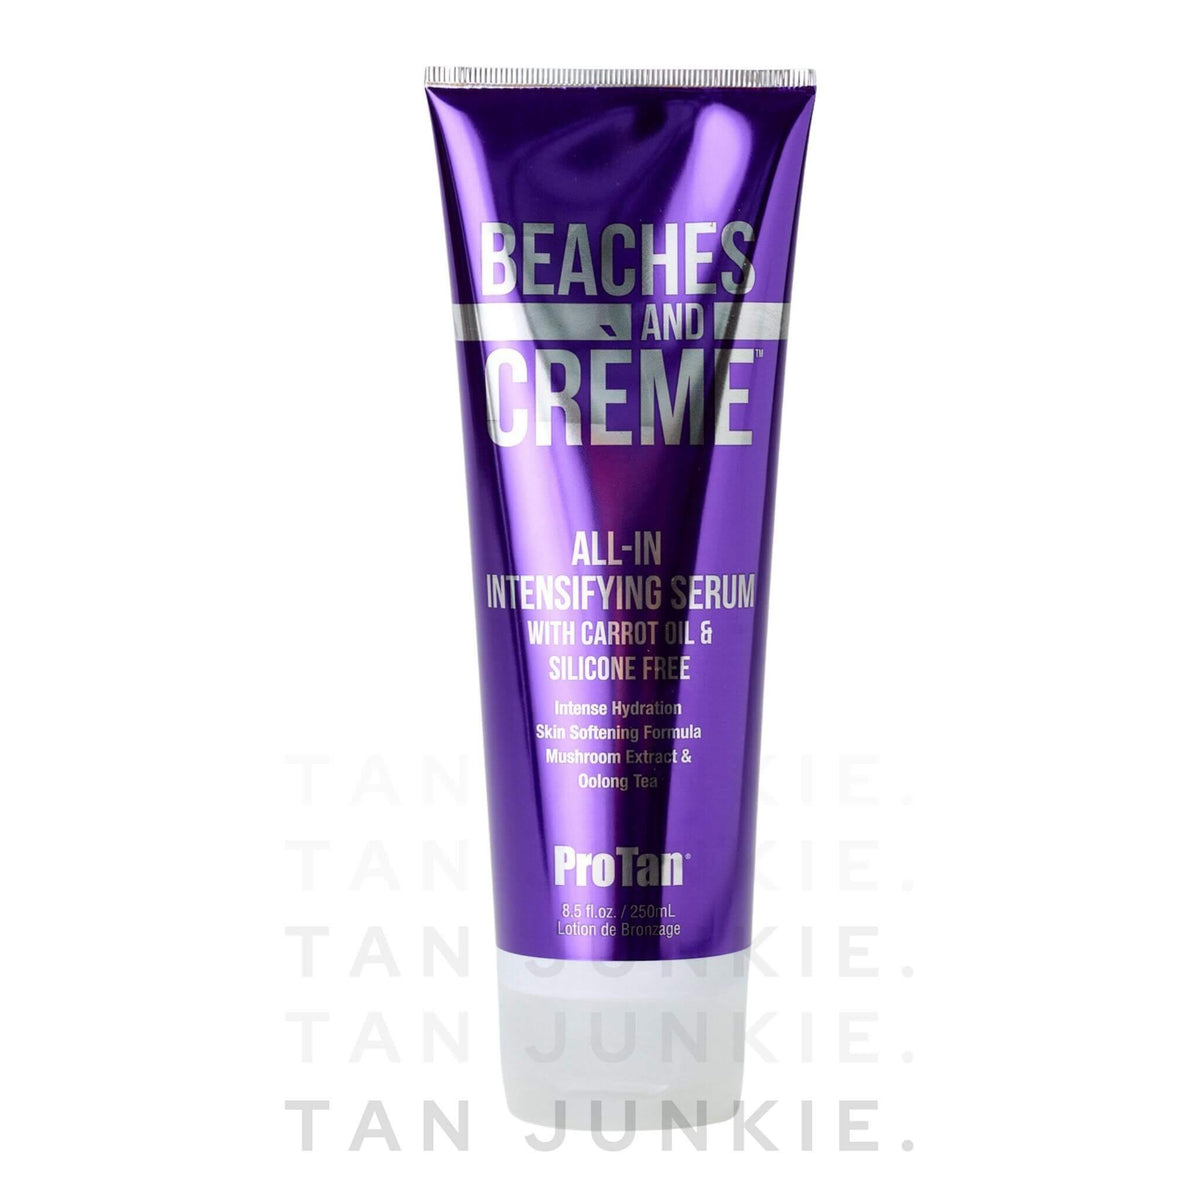 Beaches & Creme All-in One Intensifying Serum - Tan Junkie